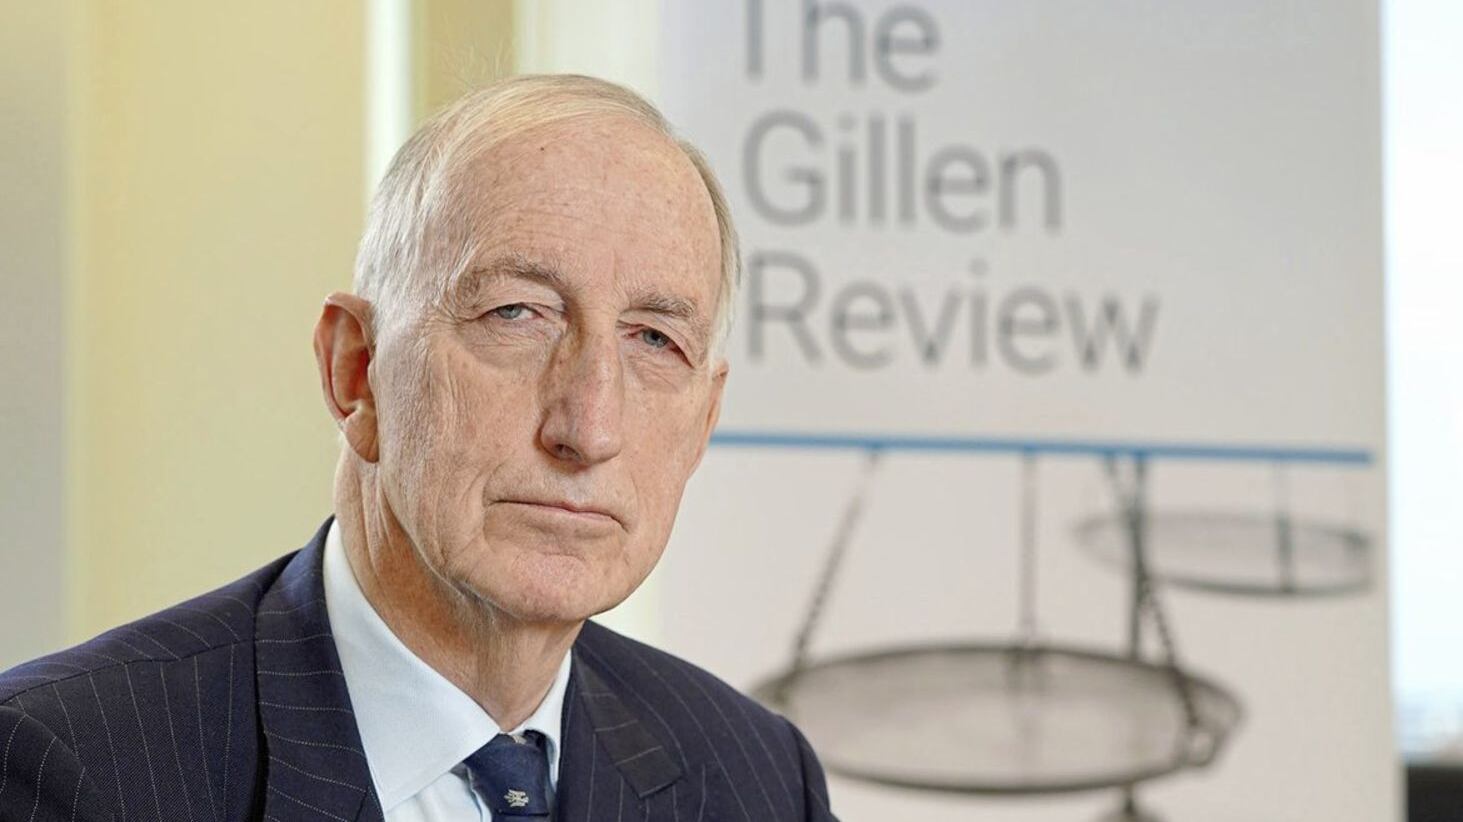 Sir John Gillen, recently retired Court of Appeal Judge, who is leading an independent review into how the law and procedures in Northern Ireland deal with serious sexual offences. Photo by Aaron McCracken. 